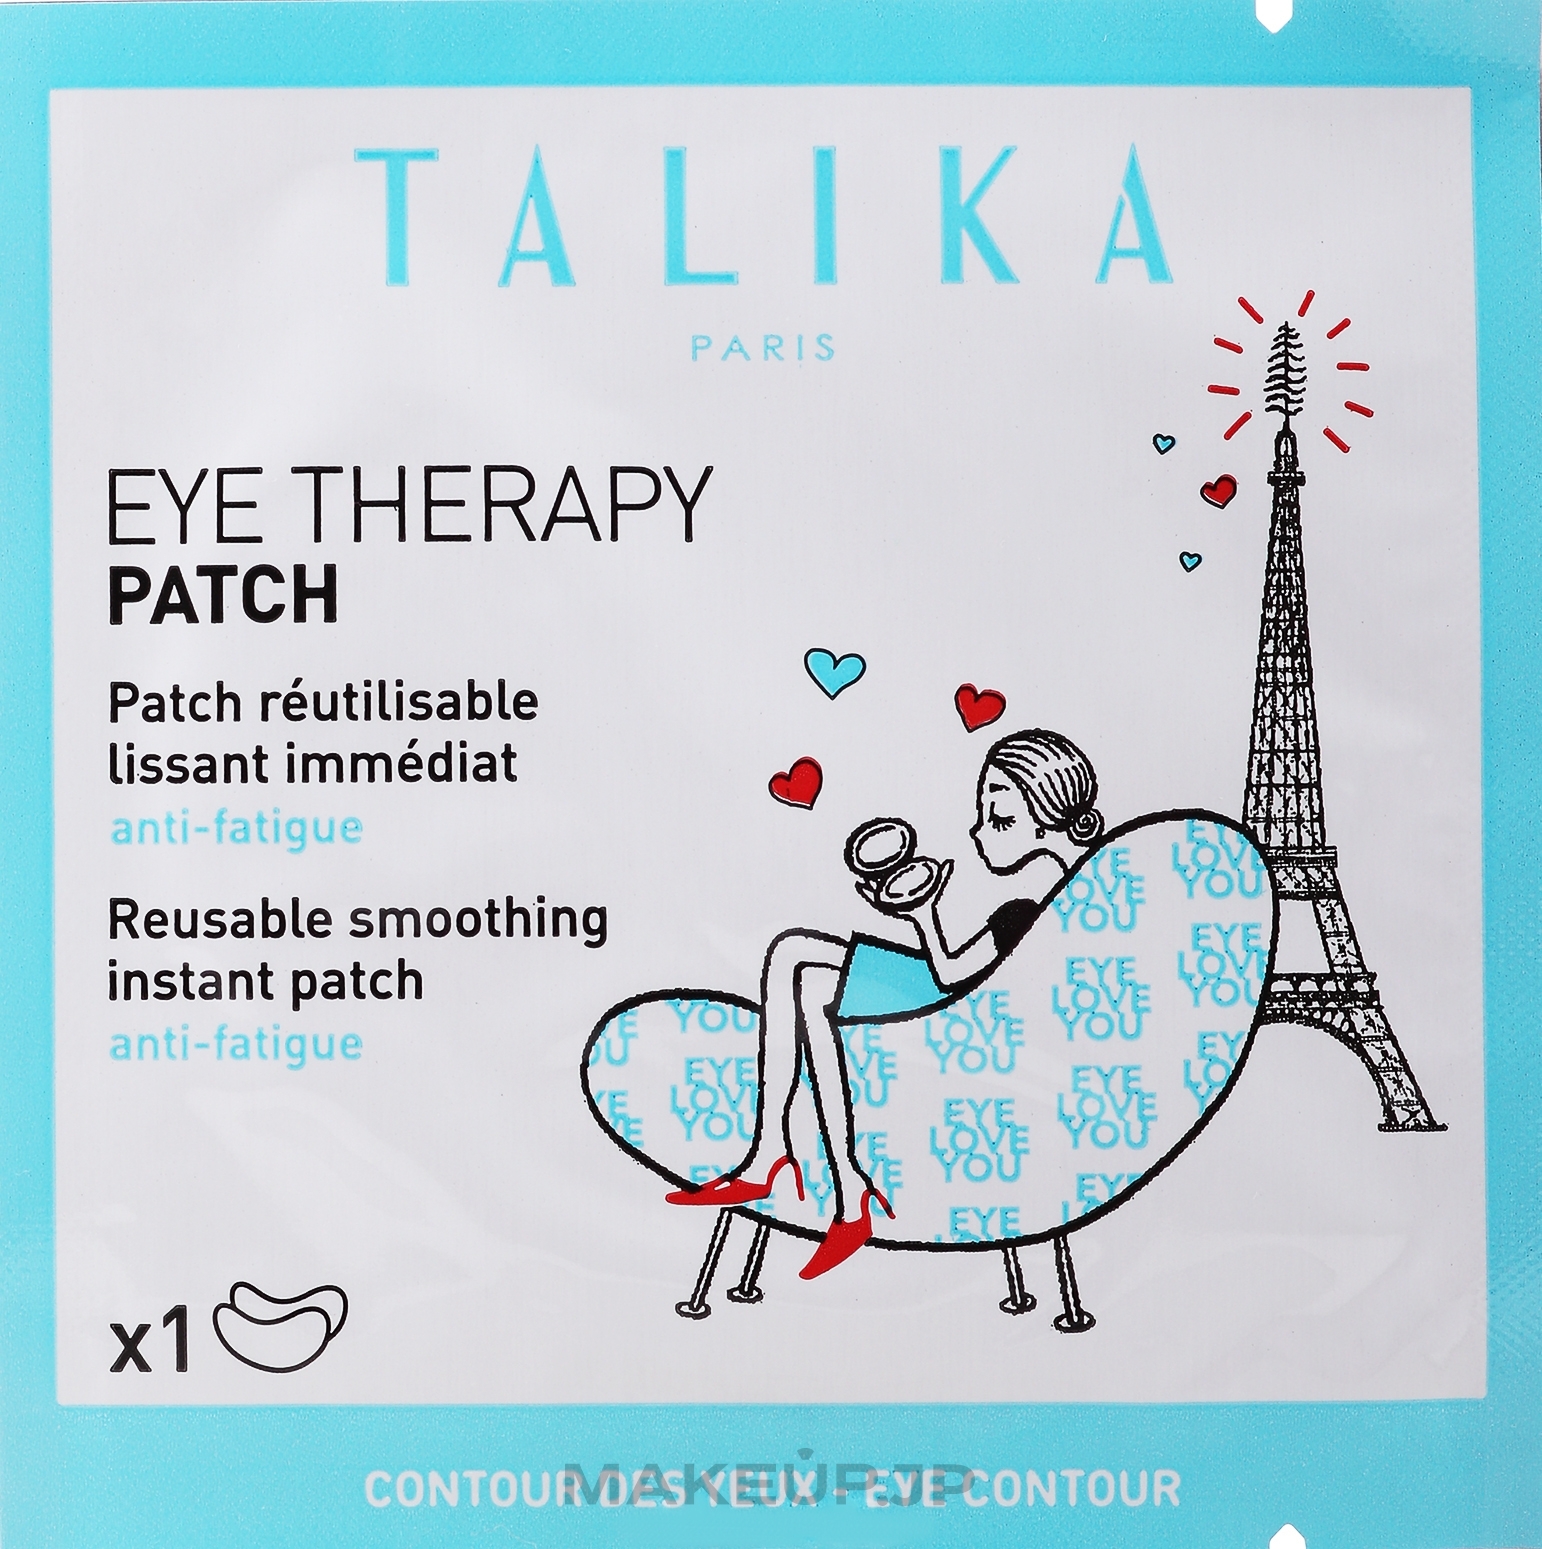 Eye Therapy Patch - Talika Eye Therapy Reusable Instant Smoothing Patch Refills — photo 2 szt.